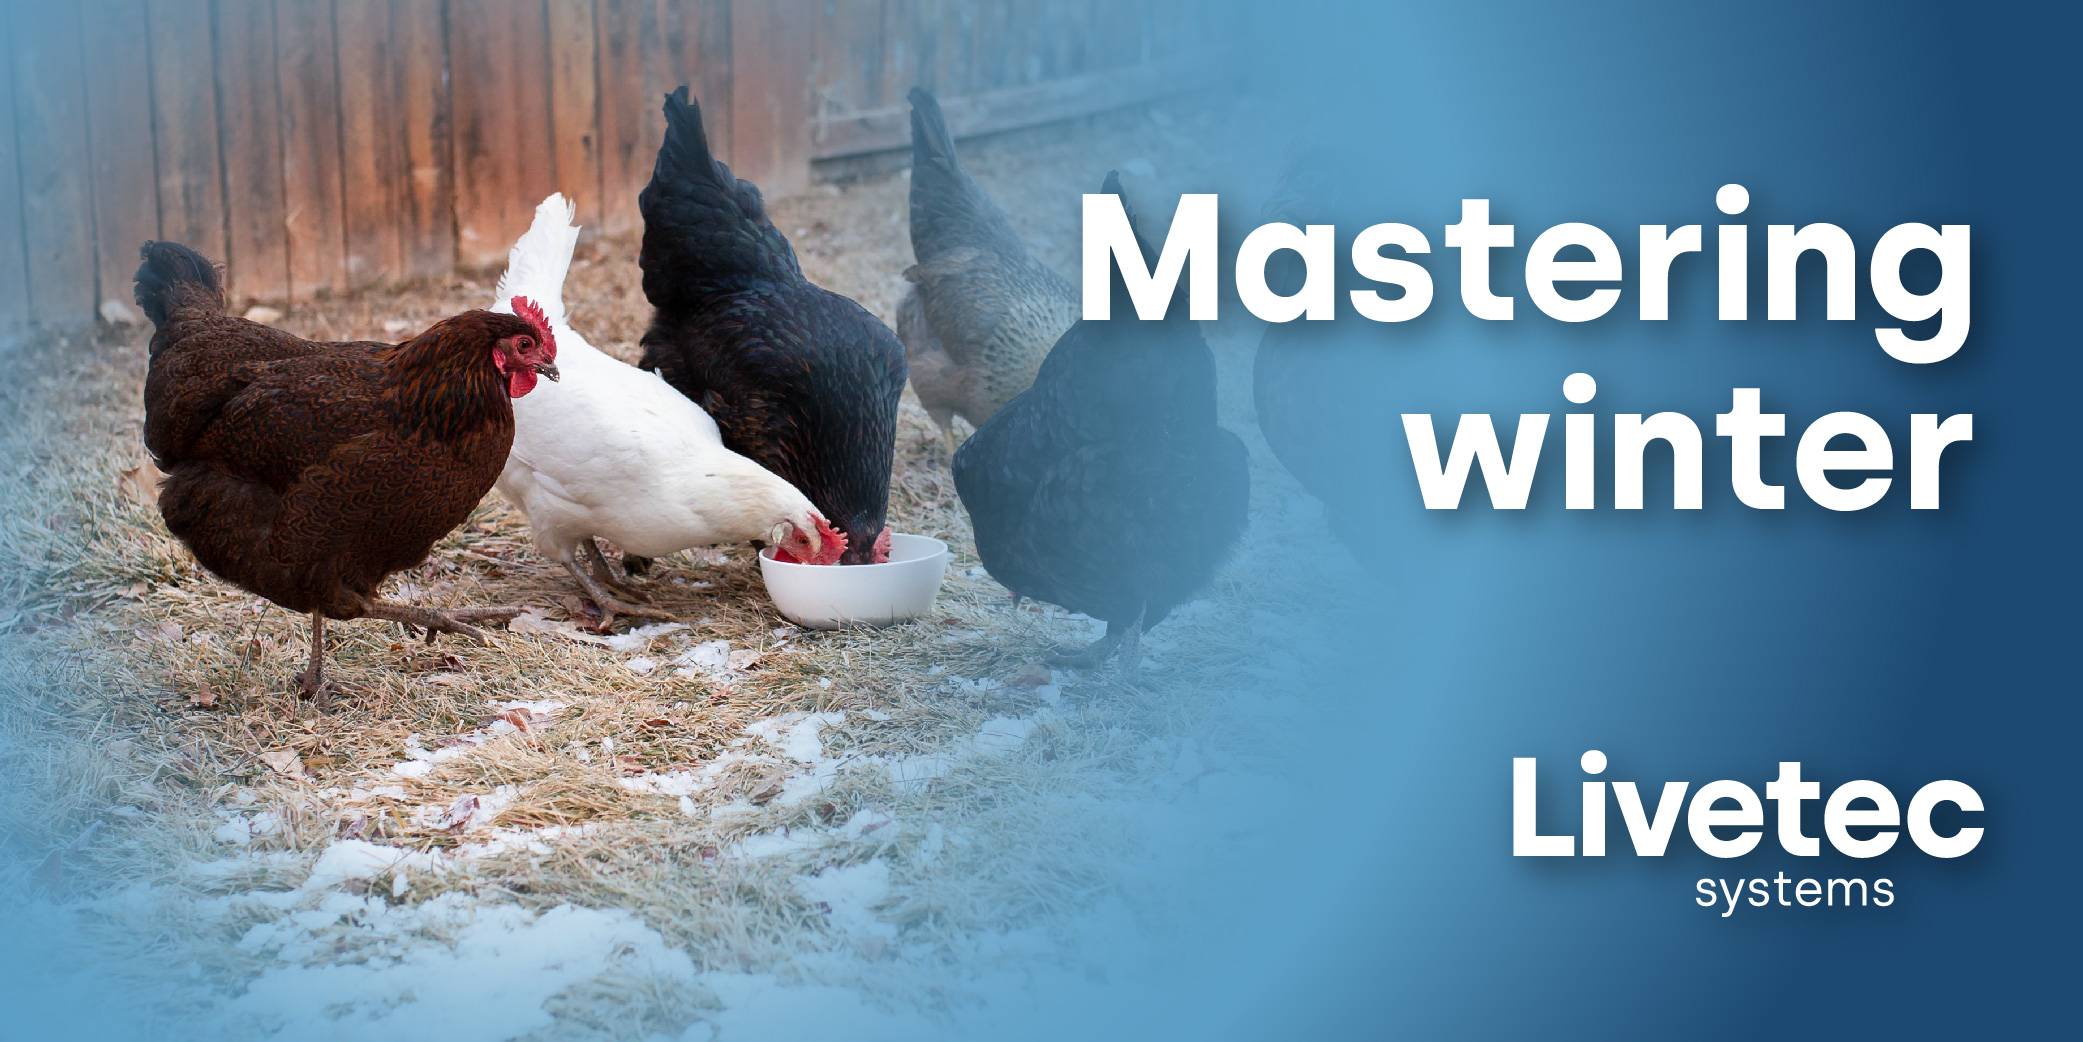 Mastering winter blog cover